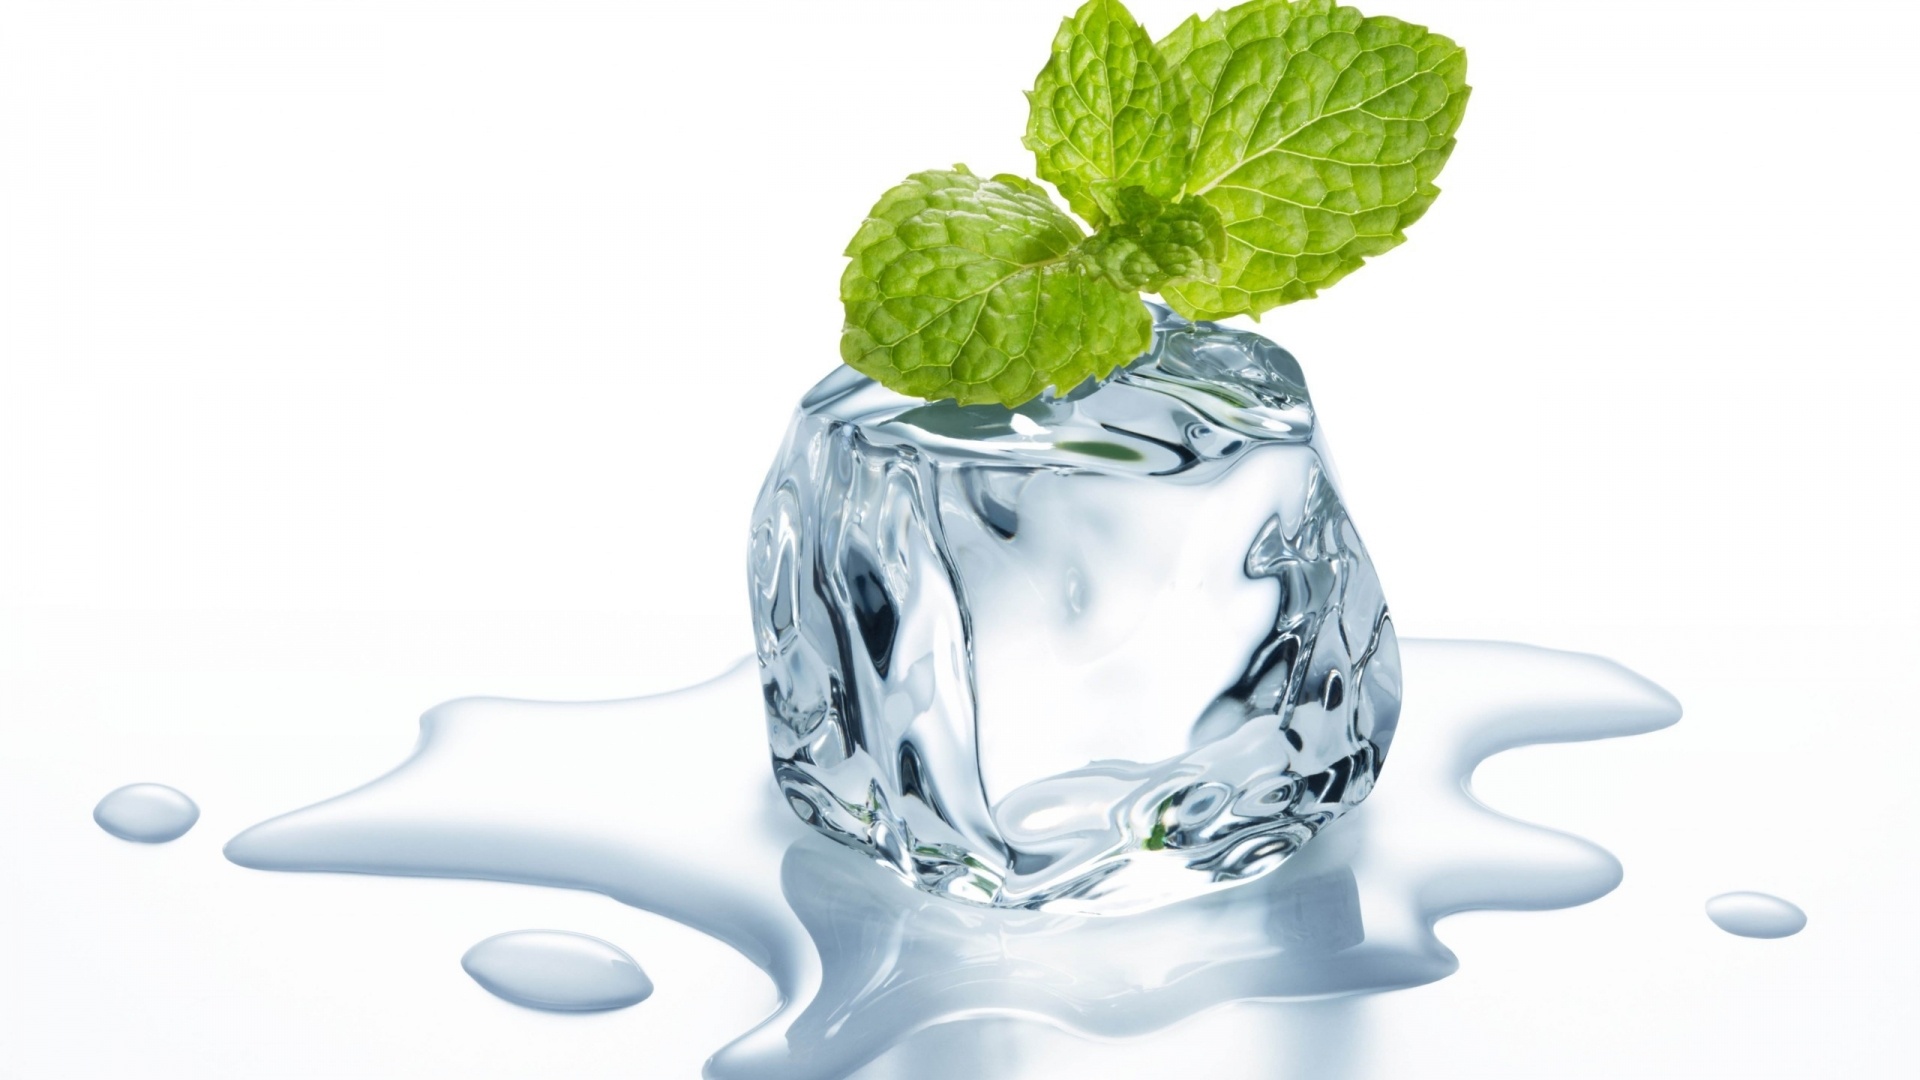 Ice cube and mint, Refreshing combination, Cool drink, Summer treat, 1920x1080 Full HD Desktop